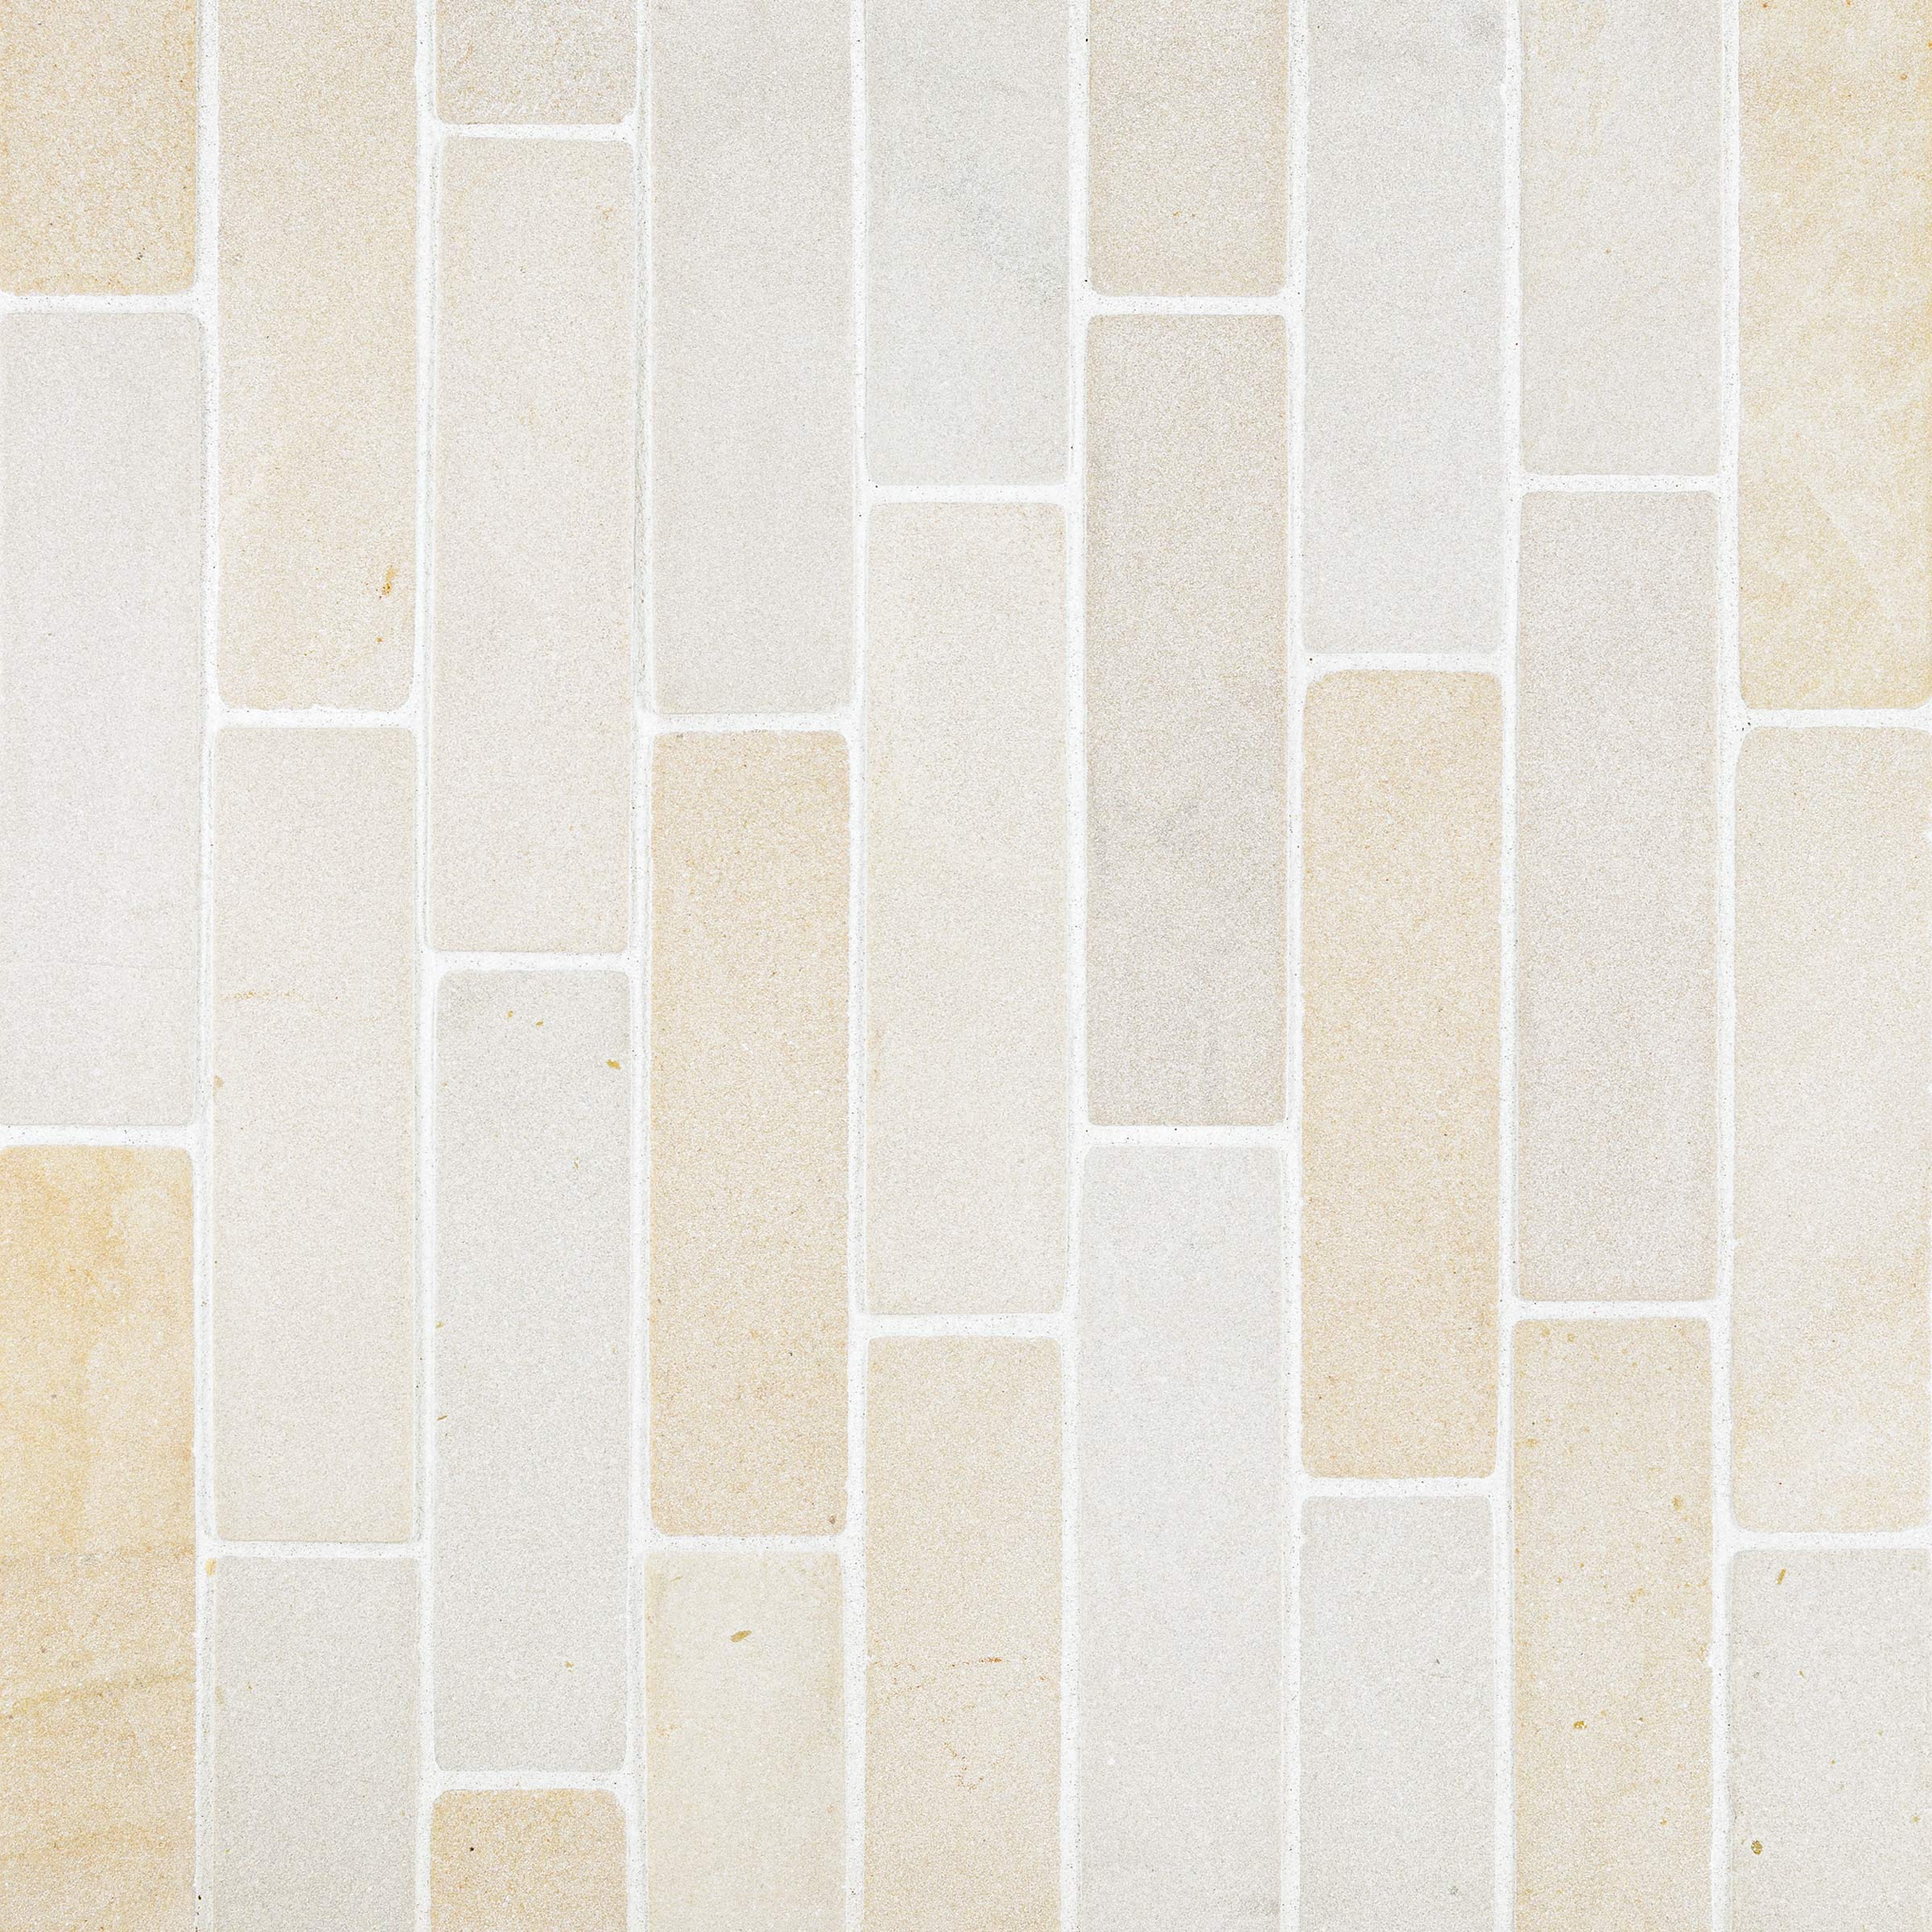 sedona sandstone brick offset tumbled beige tan linen gold 2x8x3_8 surface group natural stone resource